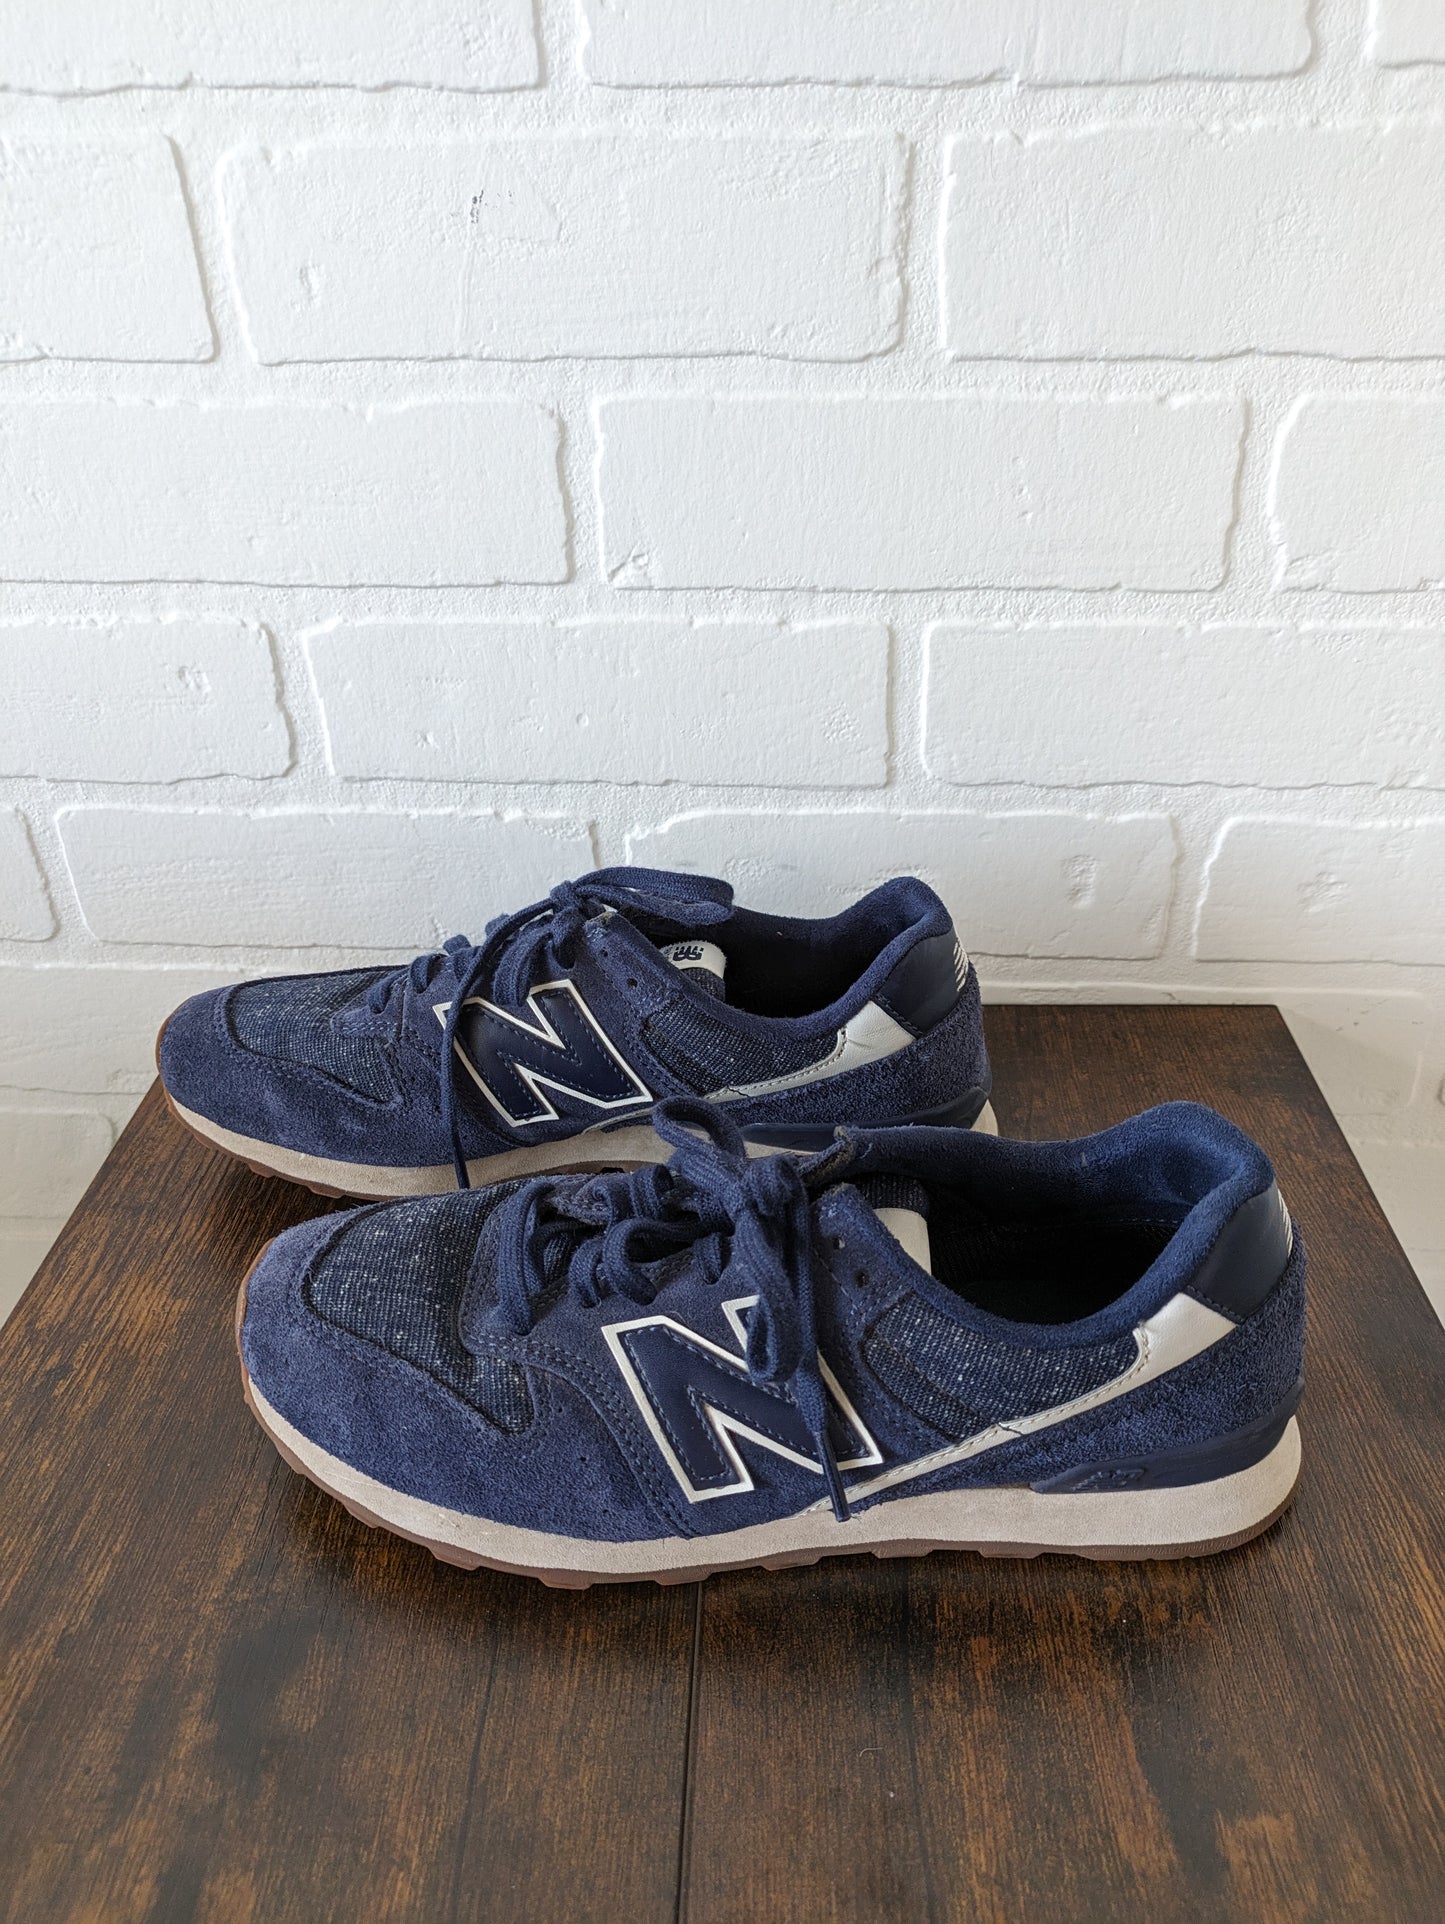 Shoes Sneakers By New Balance  Size: 7